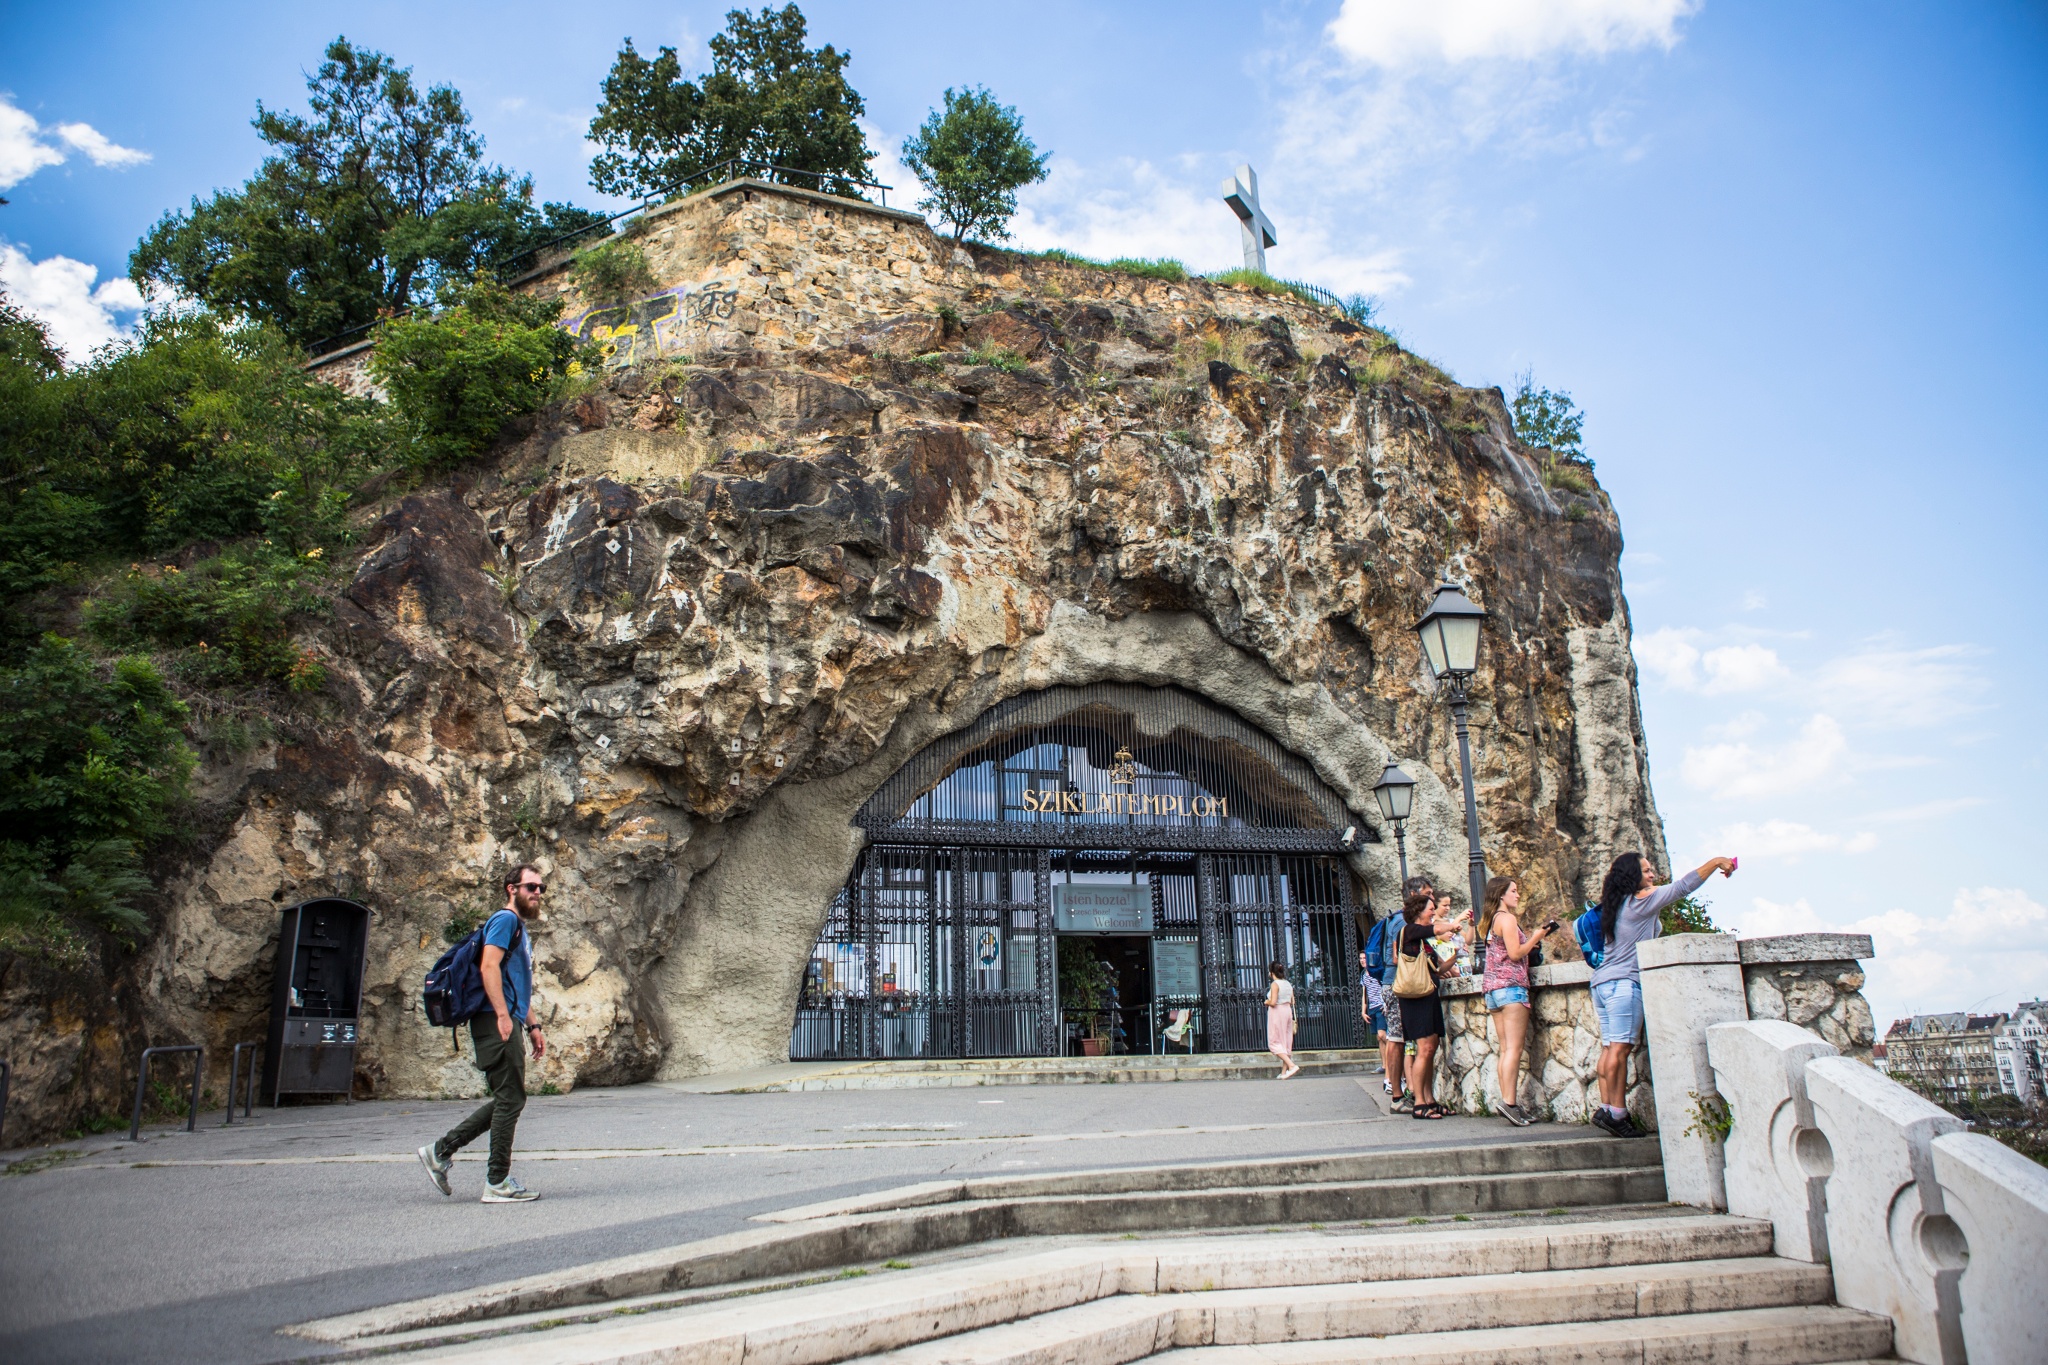 St. Ivan’s cave, the mysterious cave church within Gellért Hill - one of the 5 curiosities